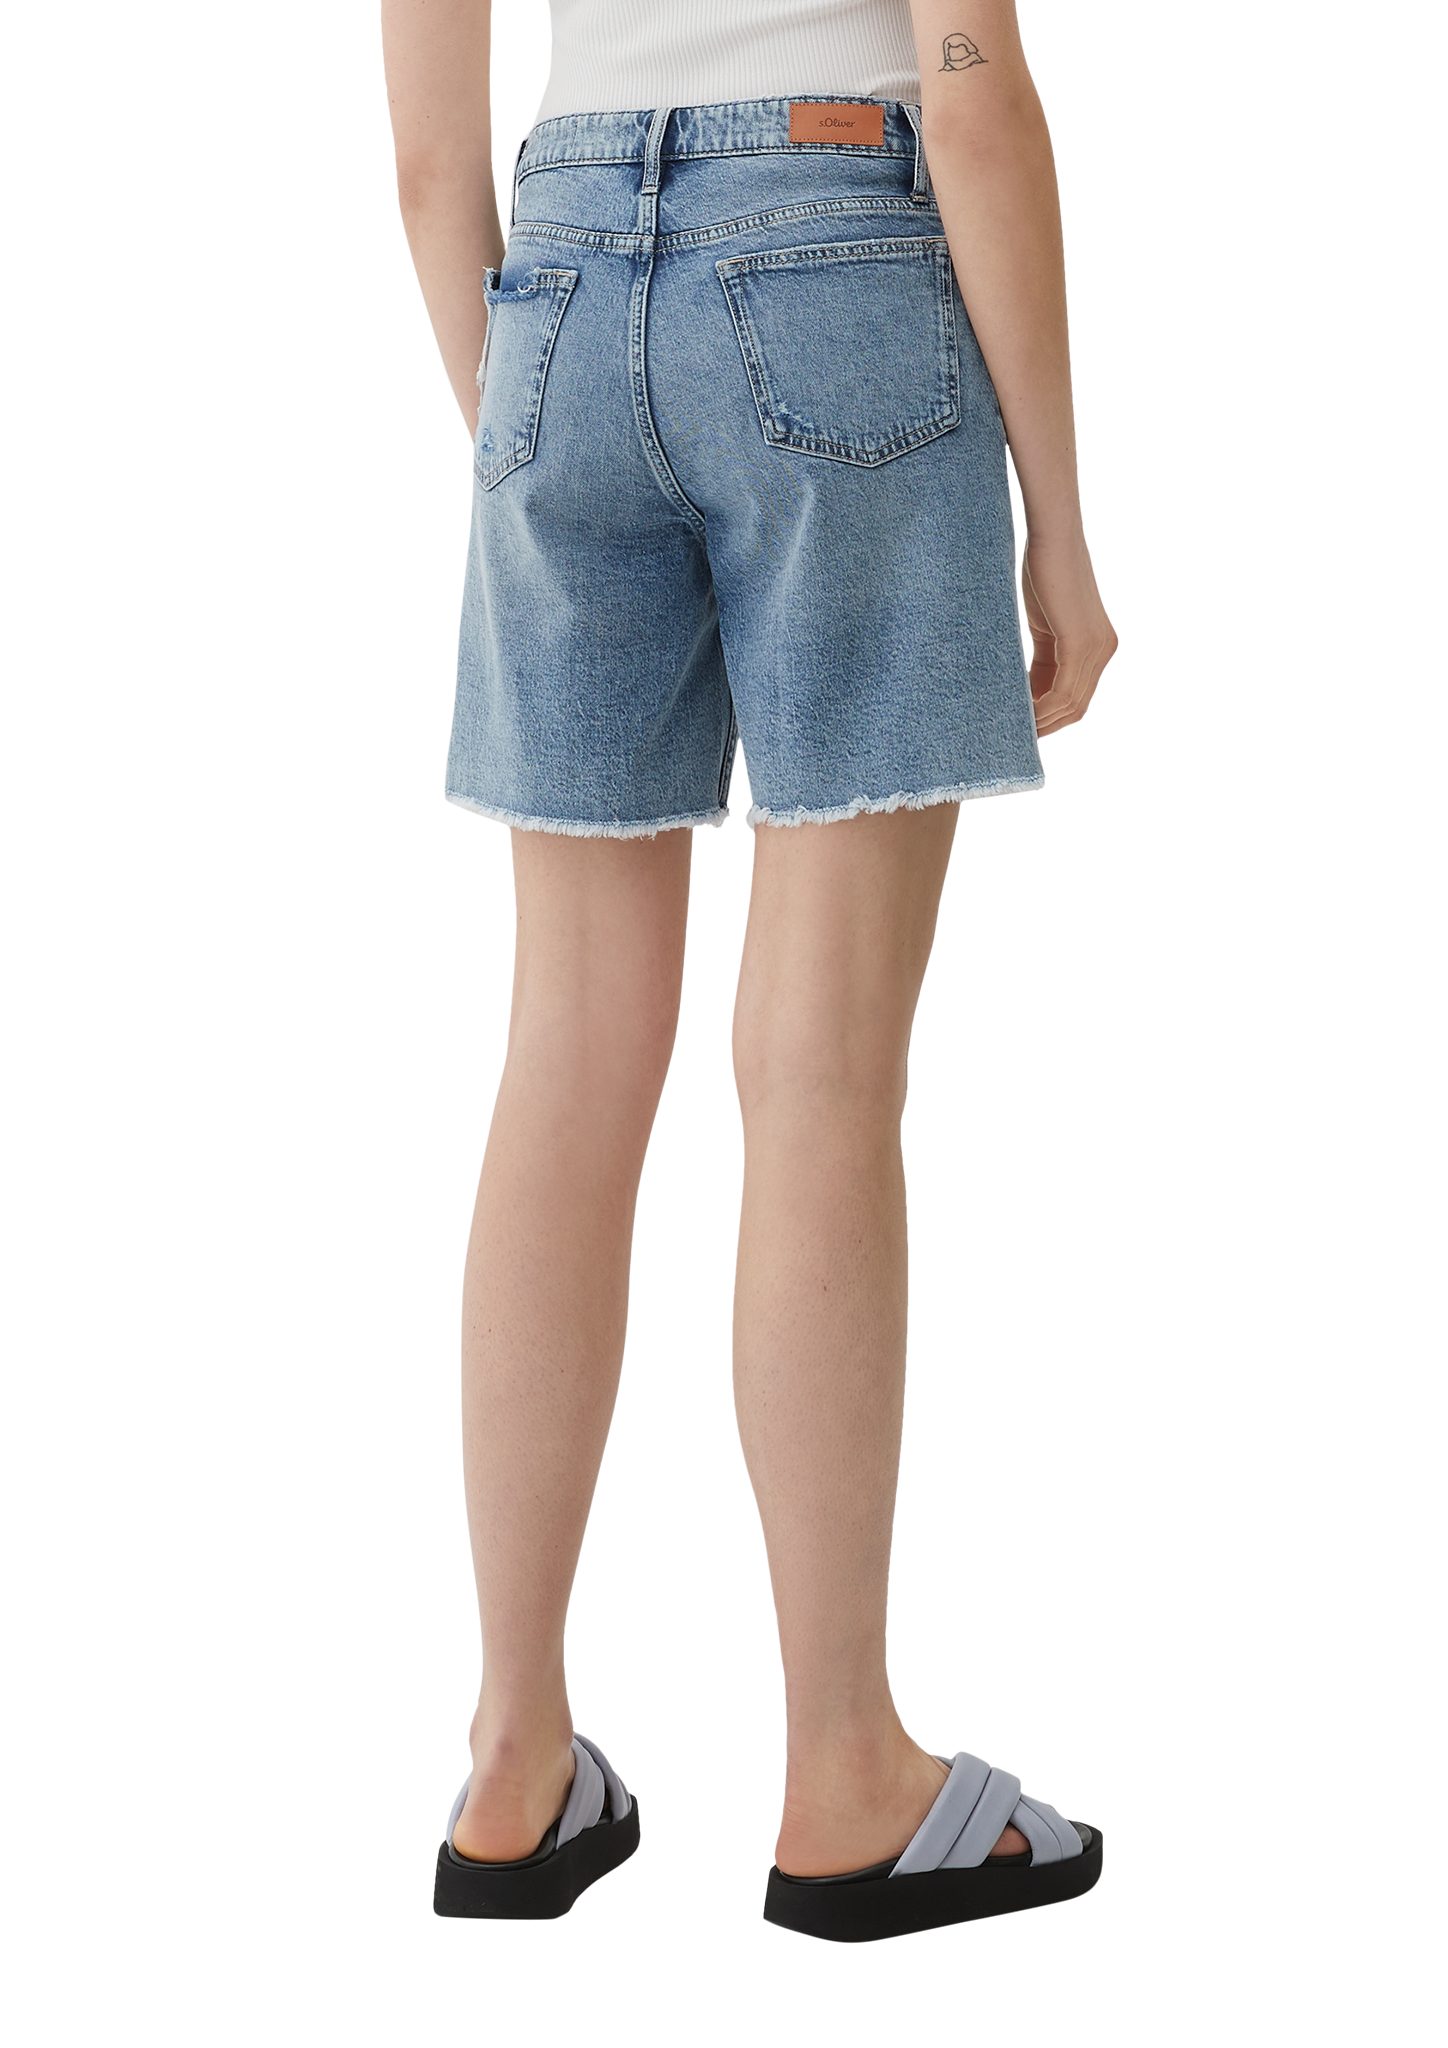 Jeans-Shorts Destroyes, / Relaxed Jeansshorts Rise / / s.Oliver Leg Straight Waschung, Fit Kontrast-Details Mid